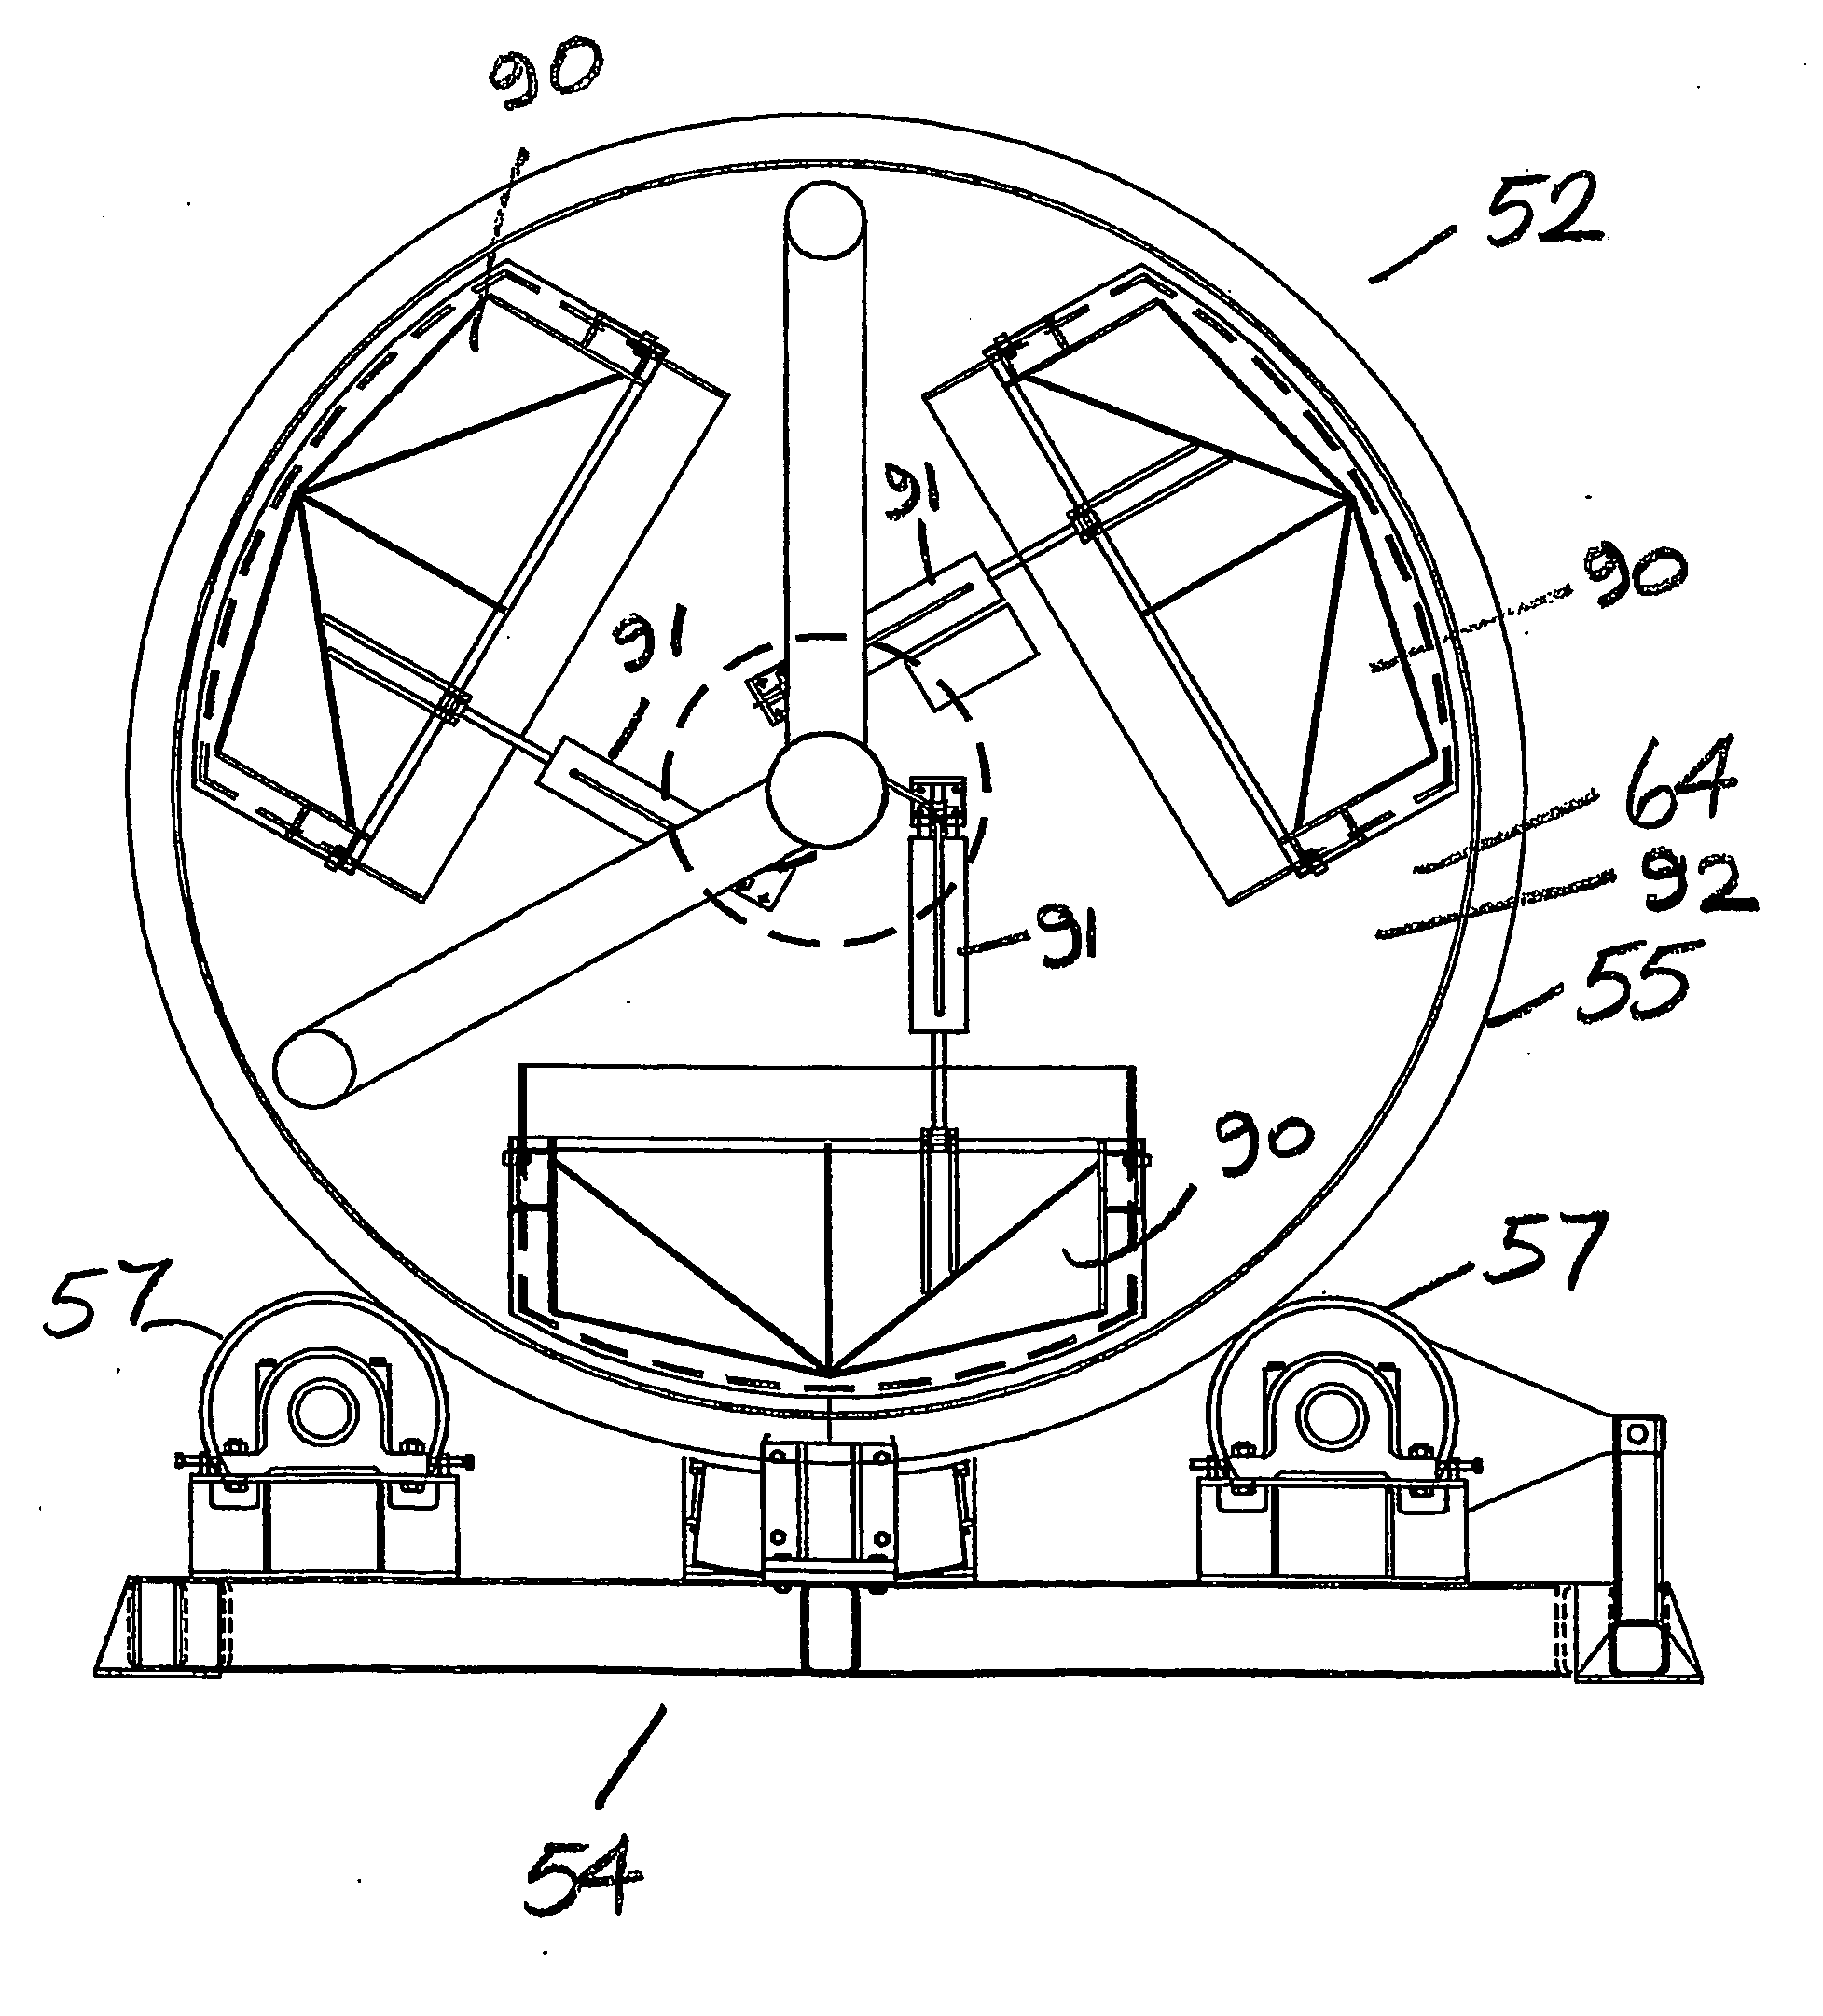 Bio-energy system and apparatus